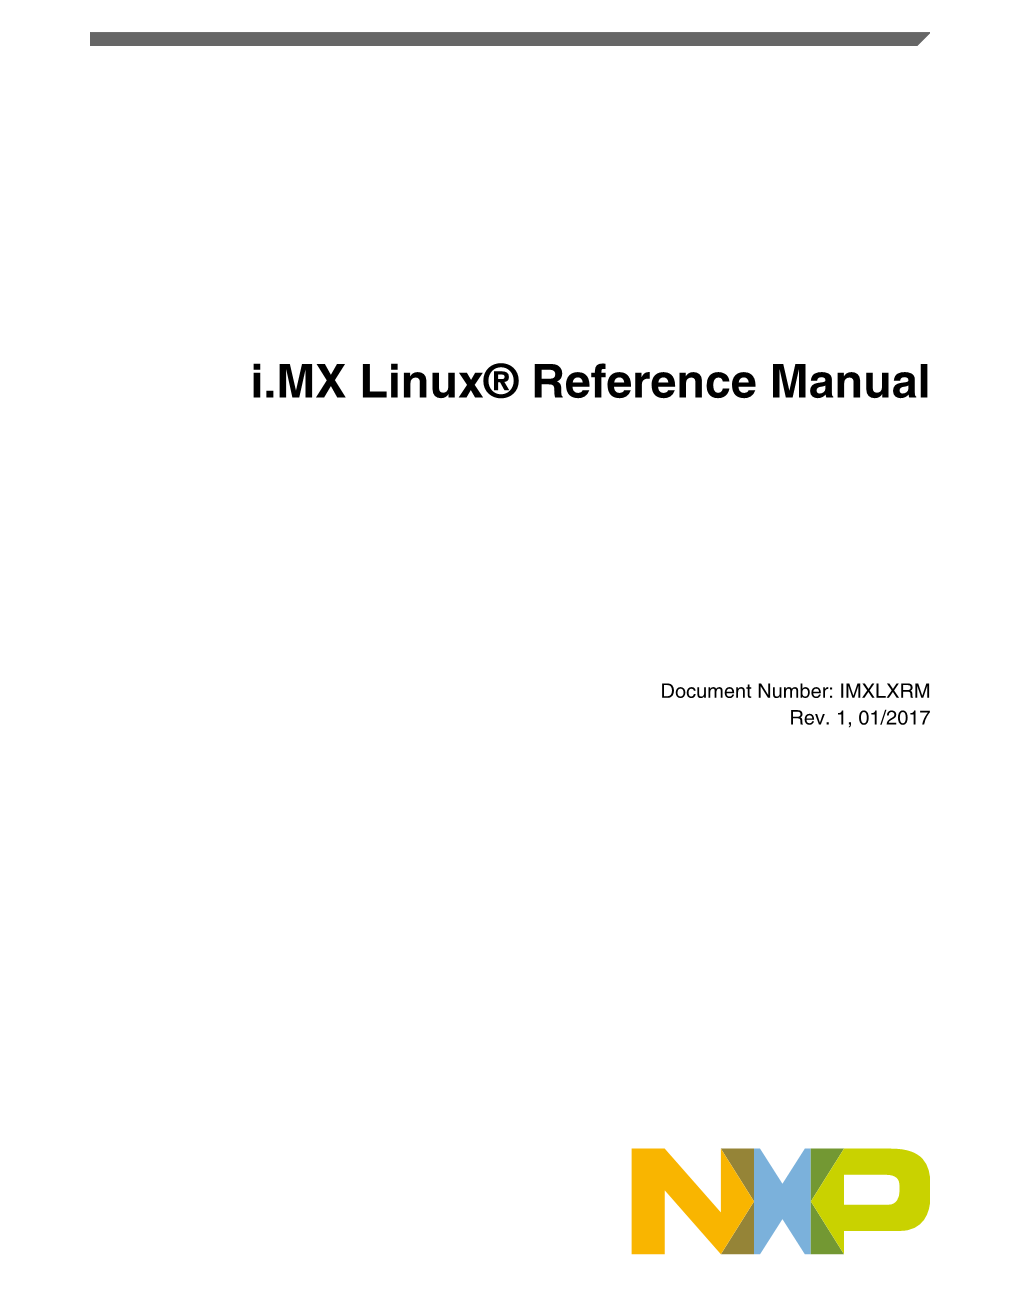 I.MX Linux® Reference Manual